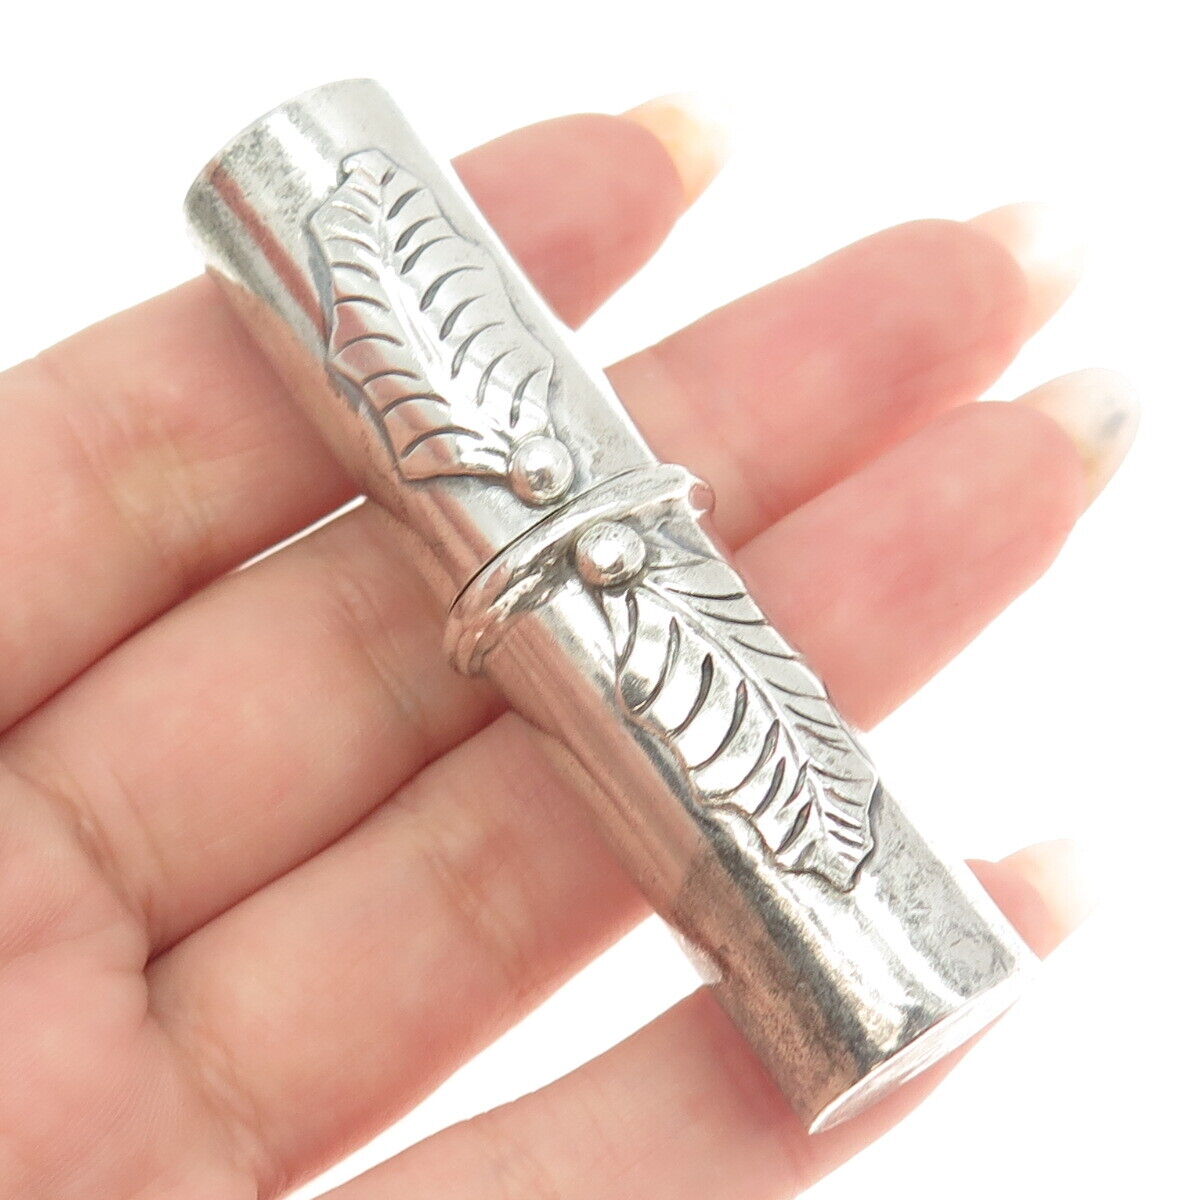 LA PLATERO Old Pawn 925 Sterling Silver Southwestern Feather Scroll Tube